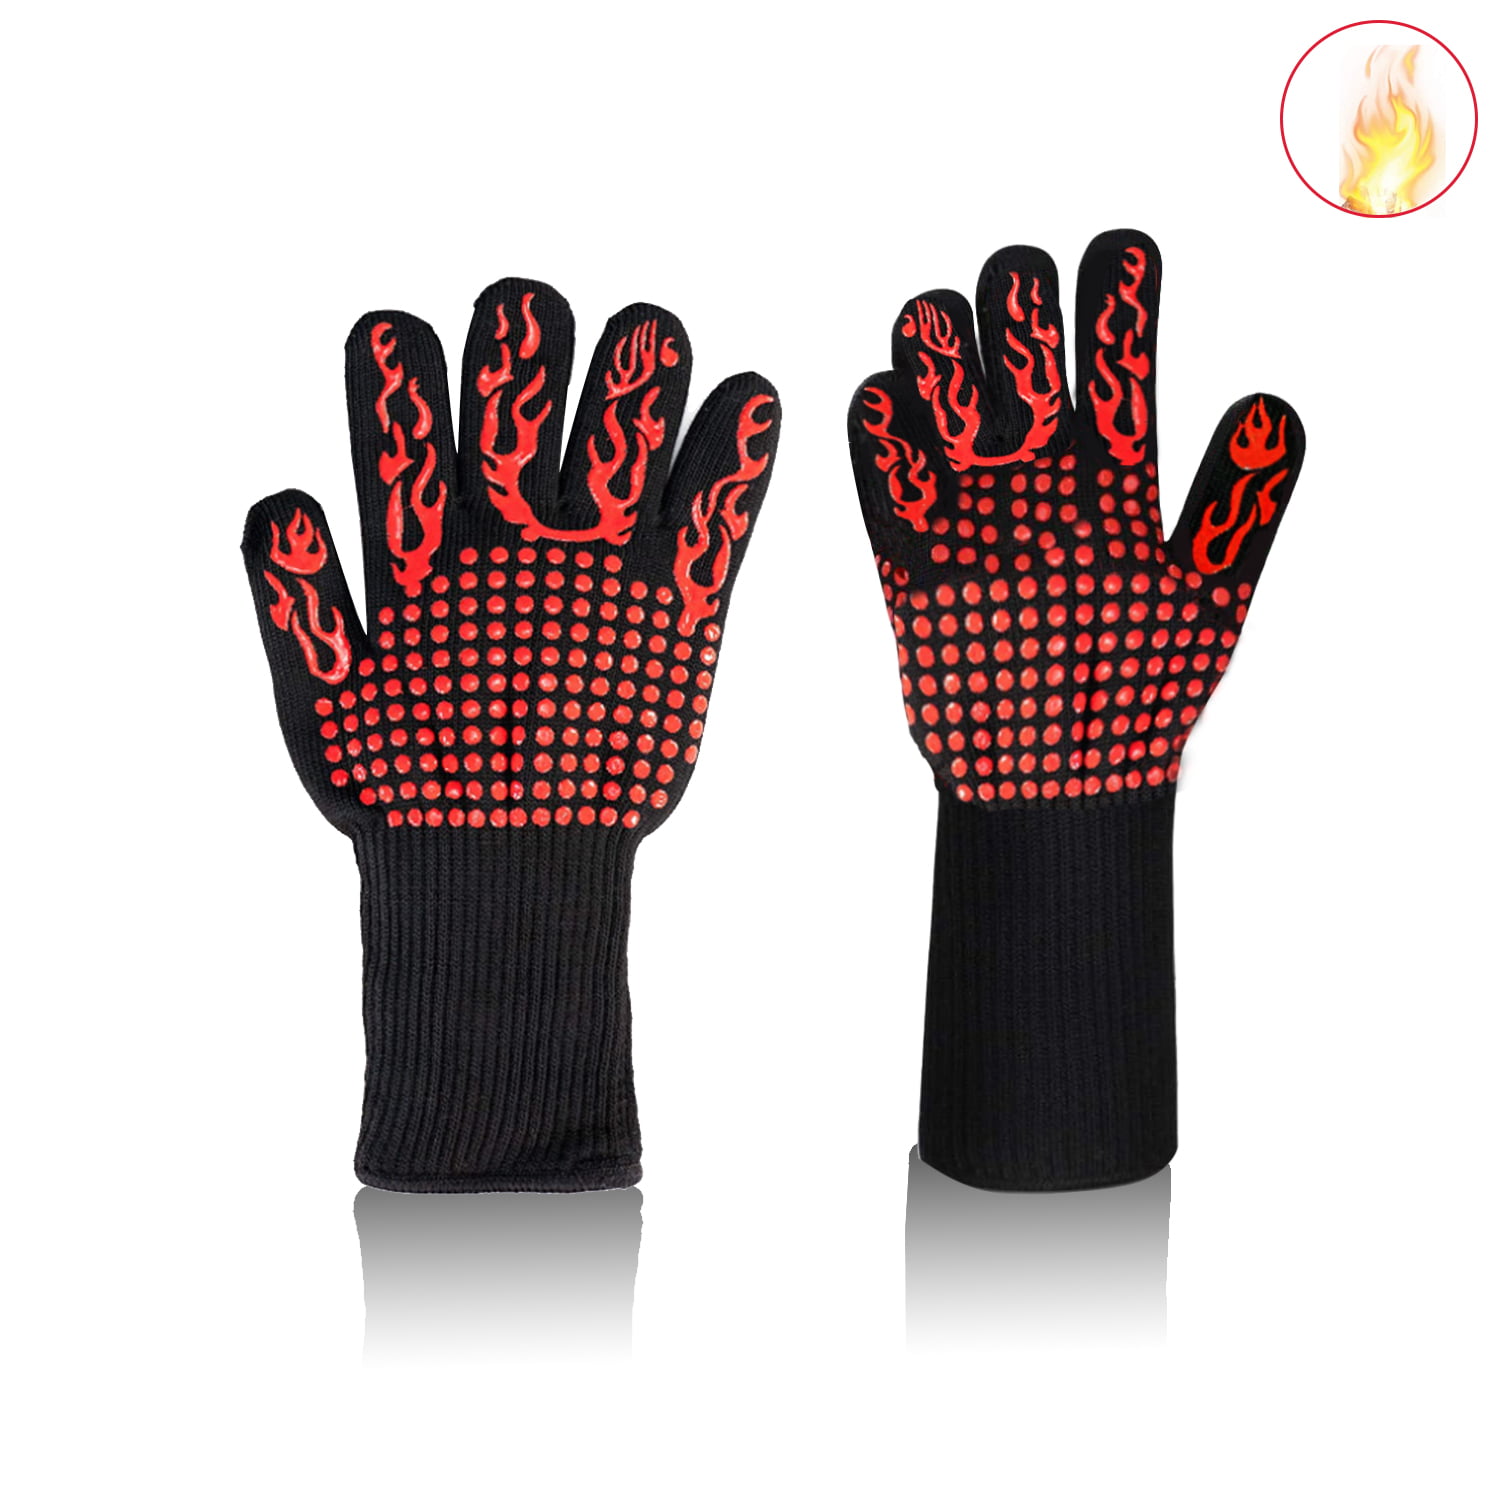 GEARONIC BBQ Long Large Heat Resistant Grill Gloves Silicone Non-slip for Kitchen Oven Barbecue Cooking Grilling Baking 